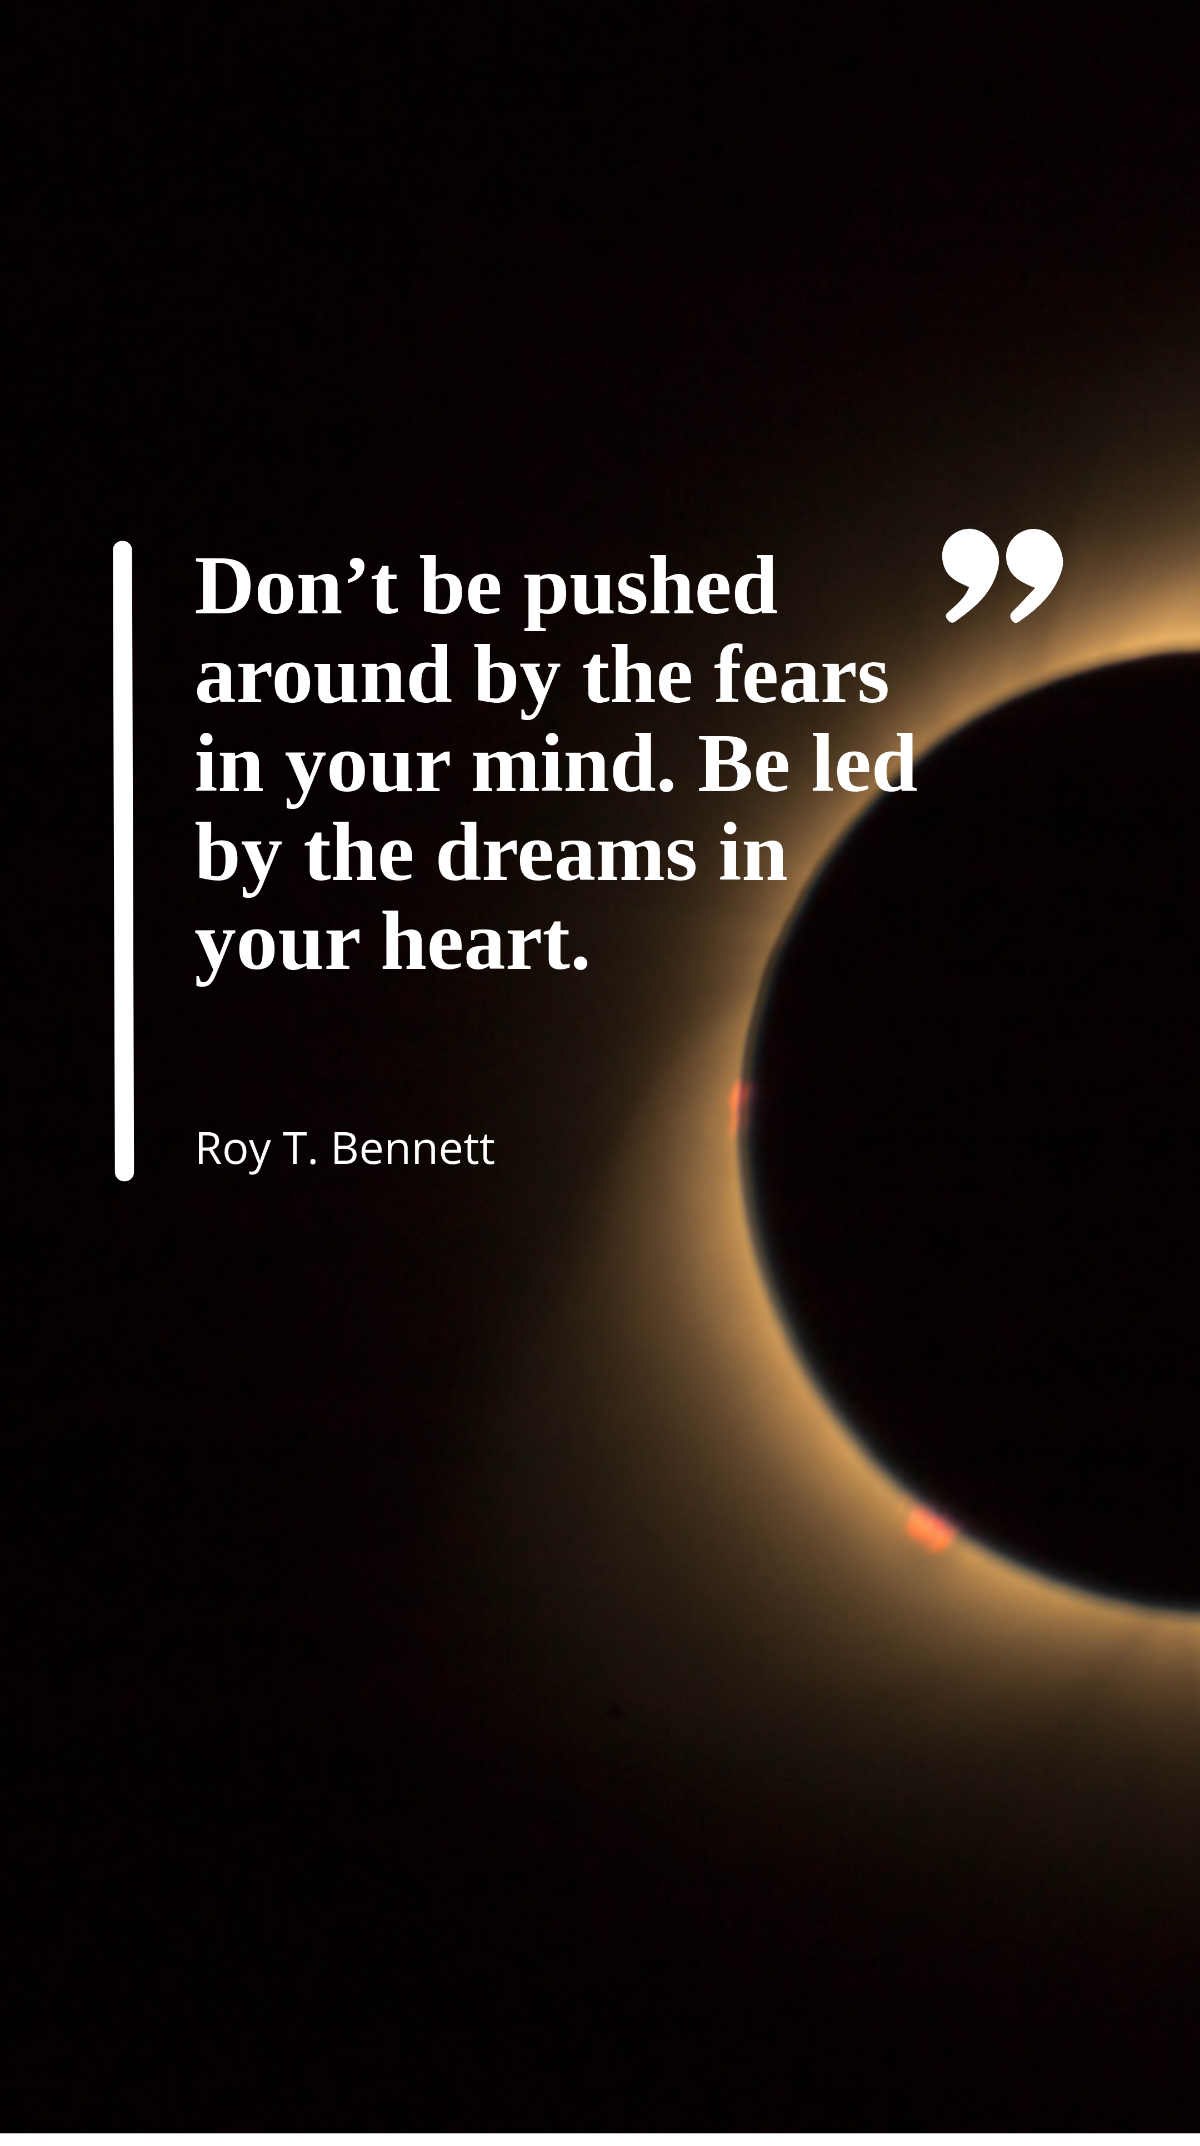 Roy T. Bennett - Don’t be pushed around by the fears in your mind. Be led by the dreams in your heart. Template